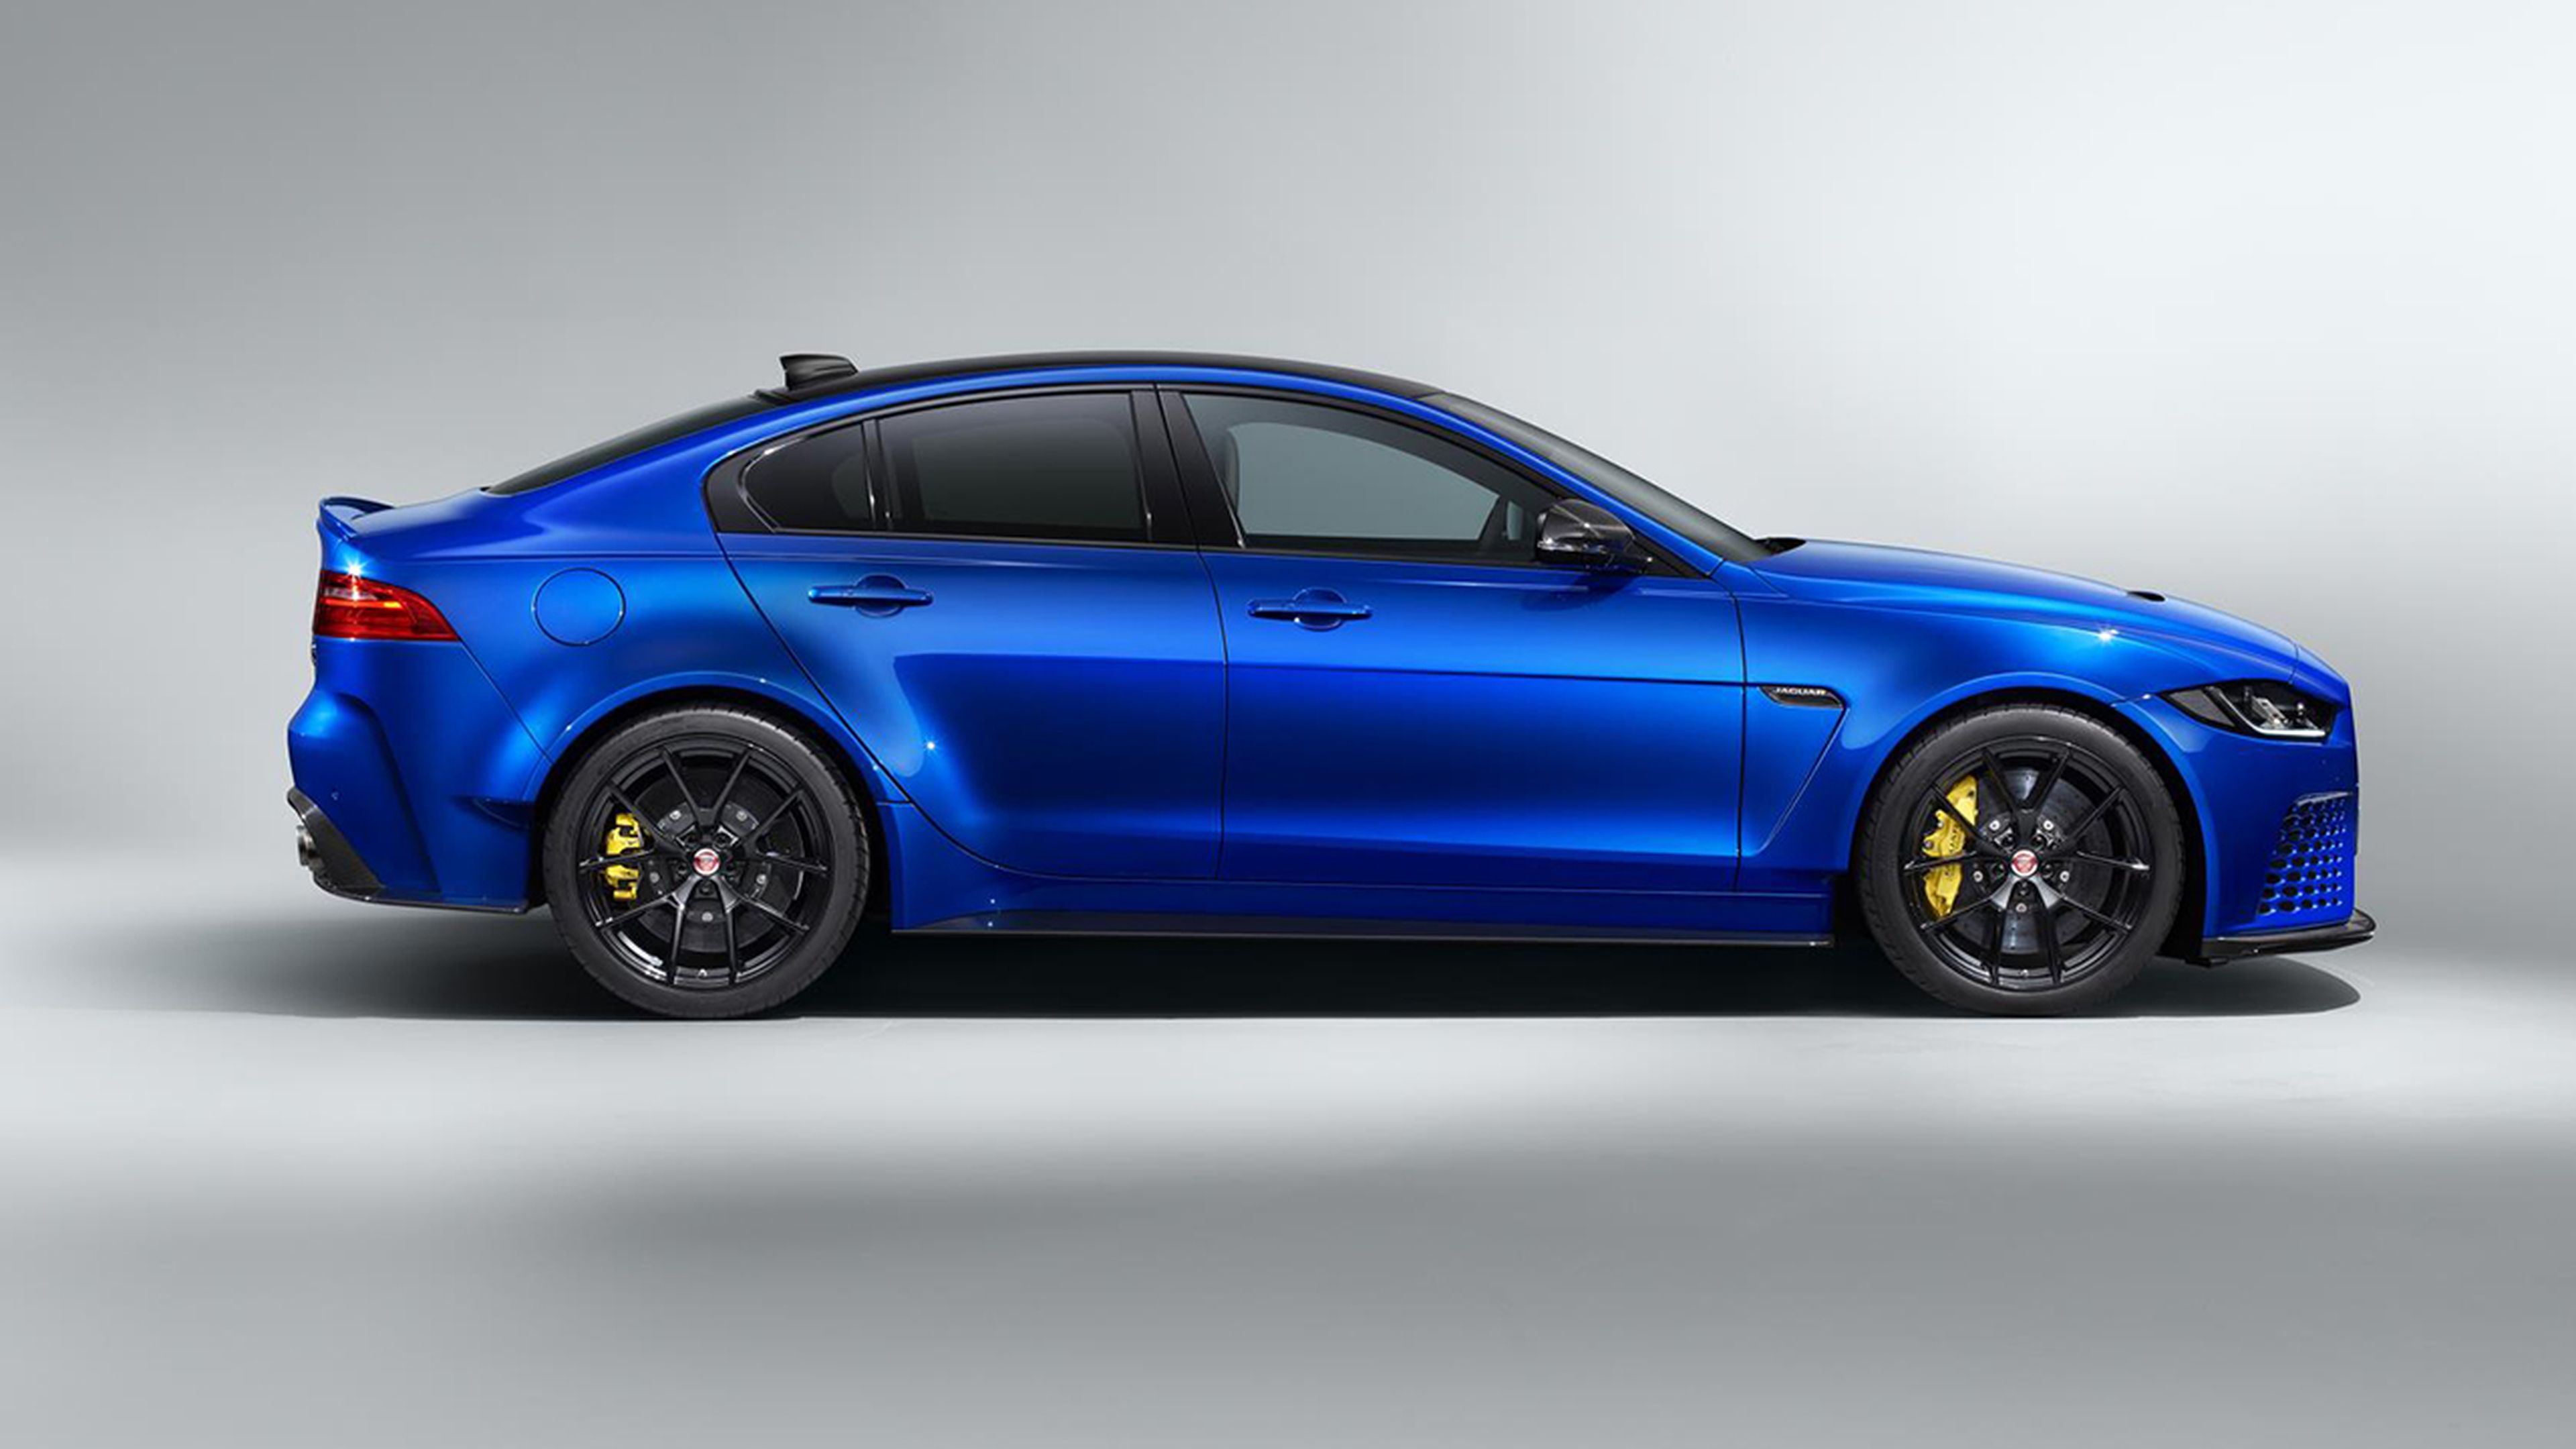 Jaguar XE SV Project 8 Touring lateral